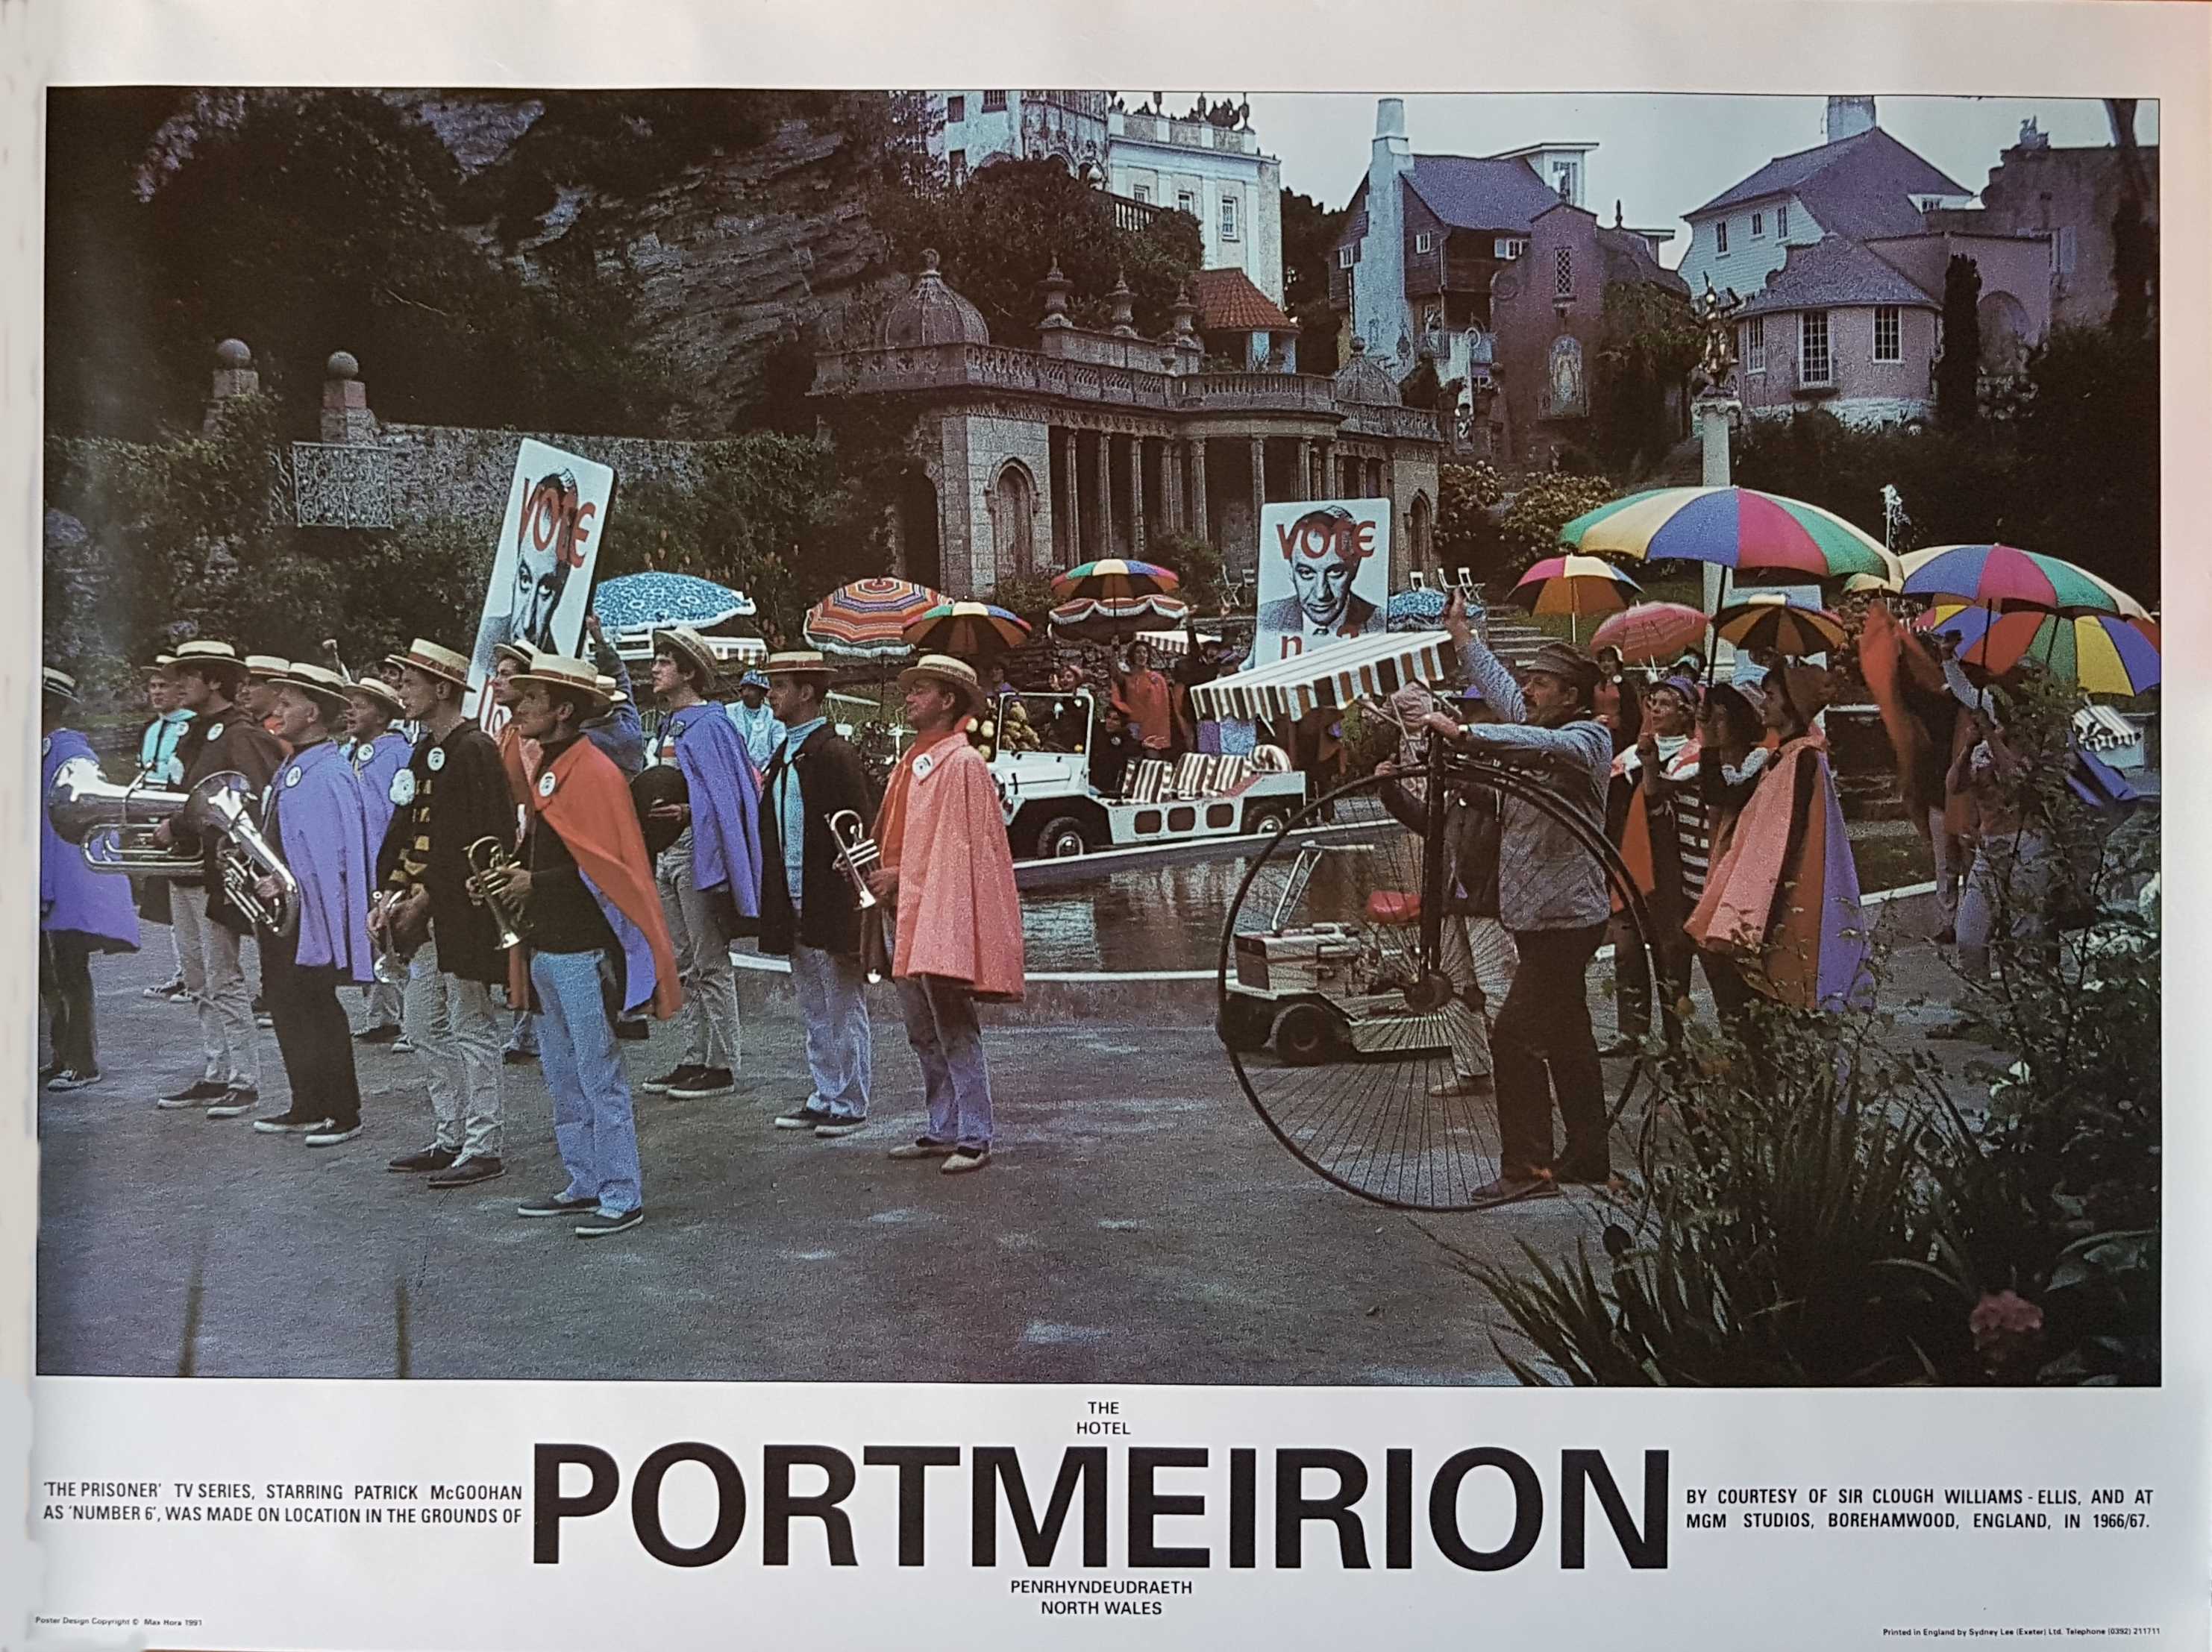 Picture of The Prisoner - Portmeirion buildings by artist Unknown from ITV, Channel 4 and Channel 5 posters library